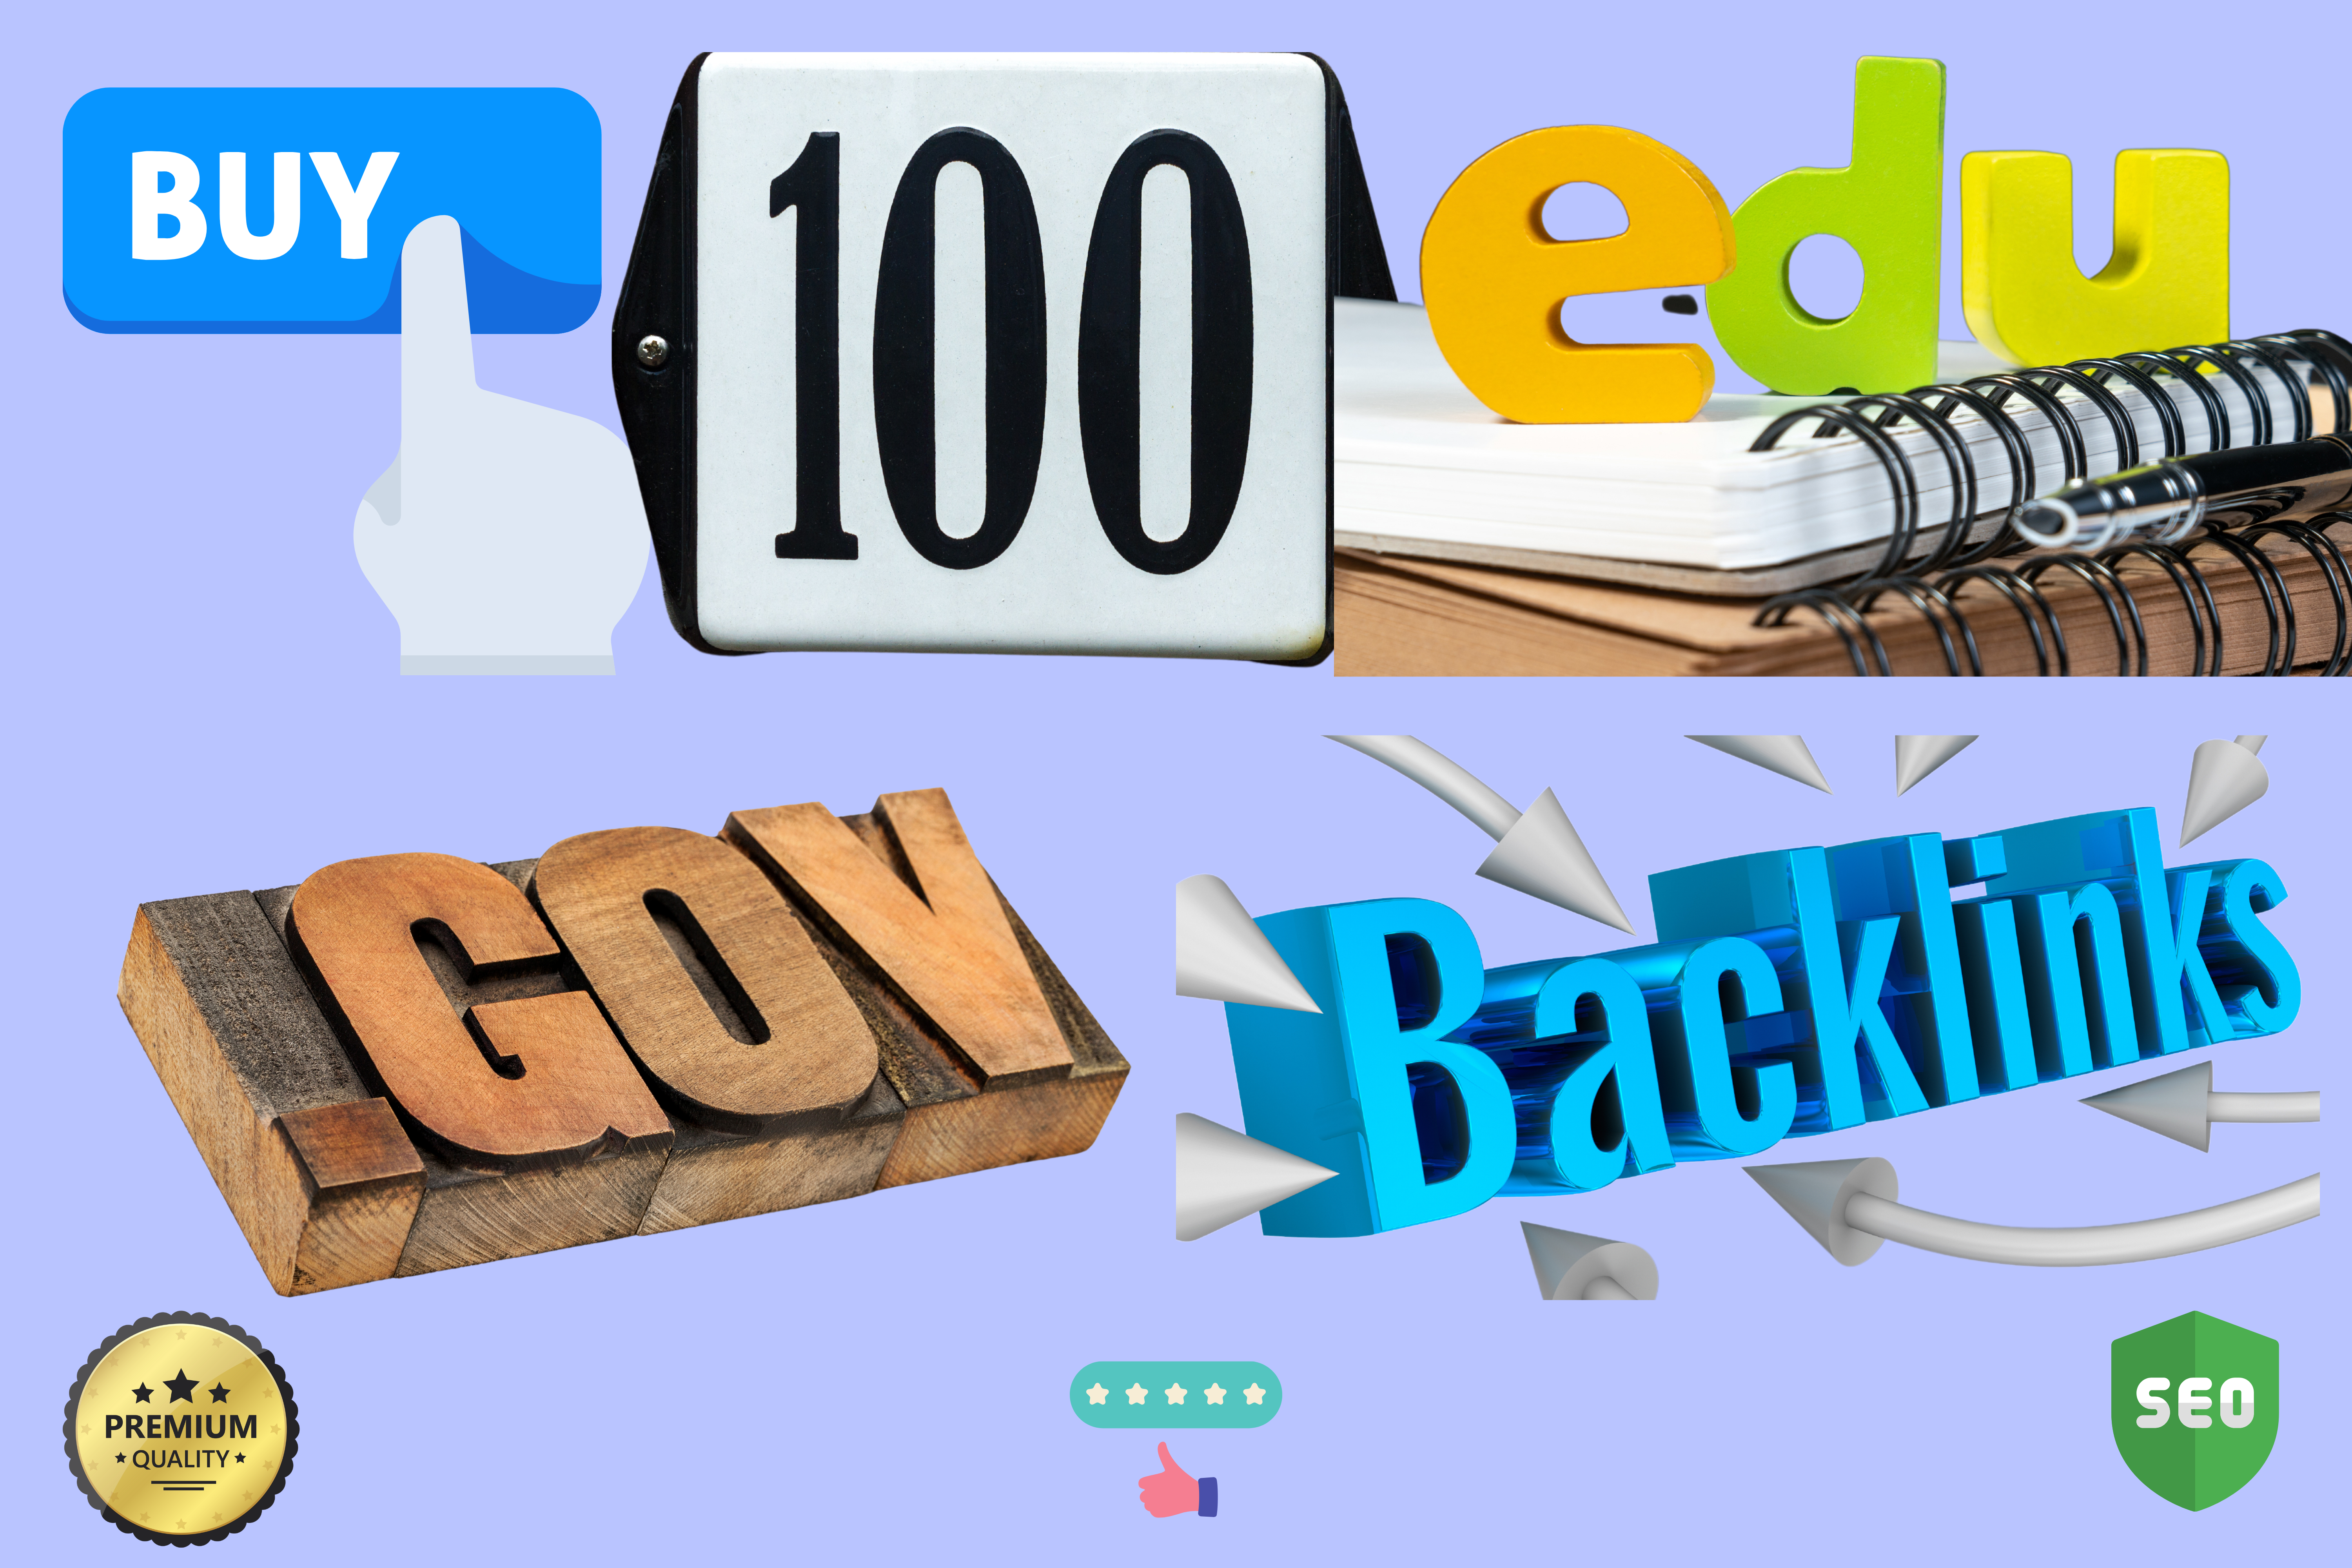 100+ High Metric Quality EDU, Gov backlinks with high domain Authority for your Ranking 